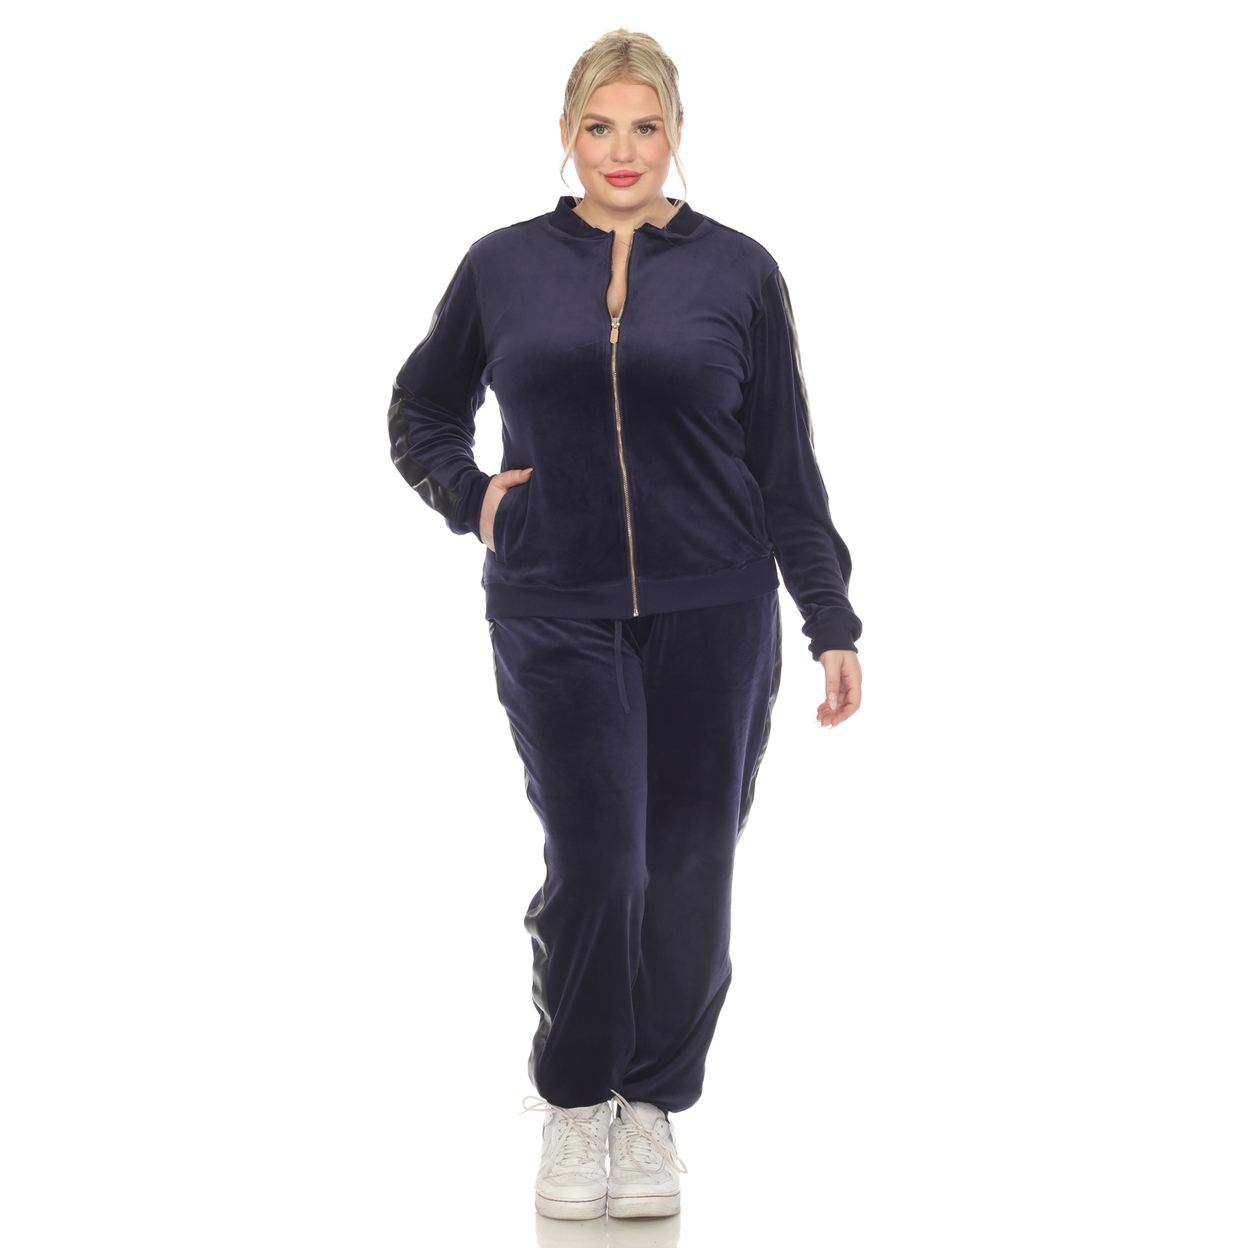 White Mark Women's 2-Piece Velour Tracksuit Set With Faux Leather Stripe - Navy, 1x